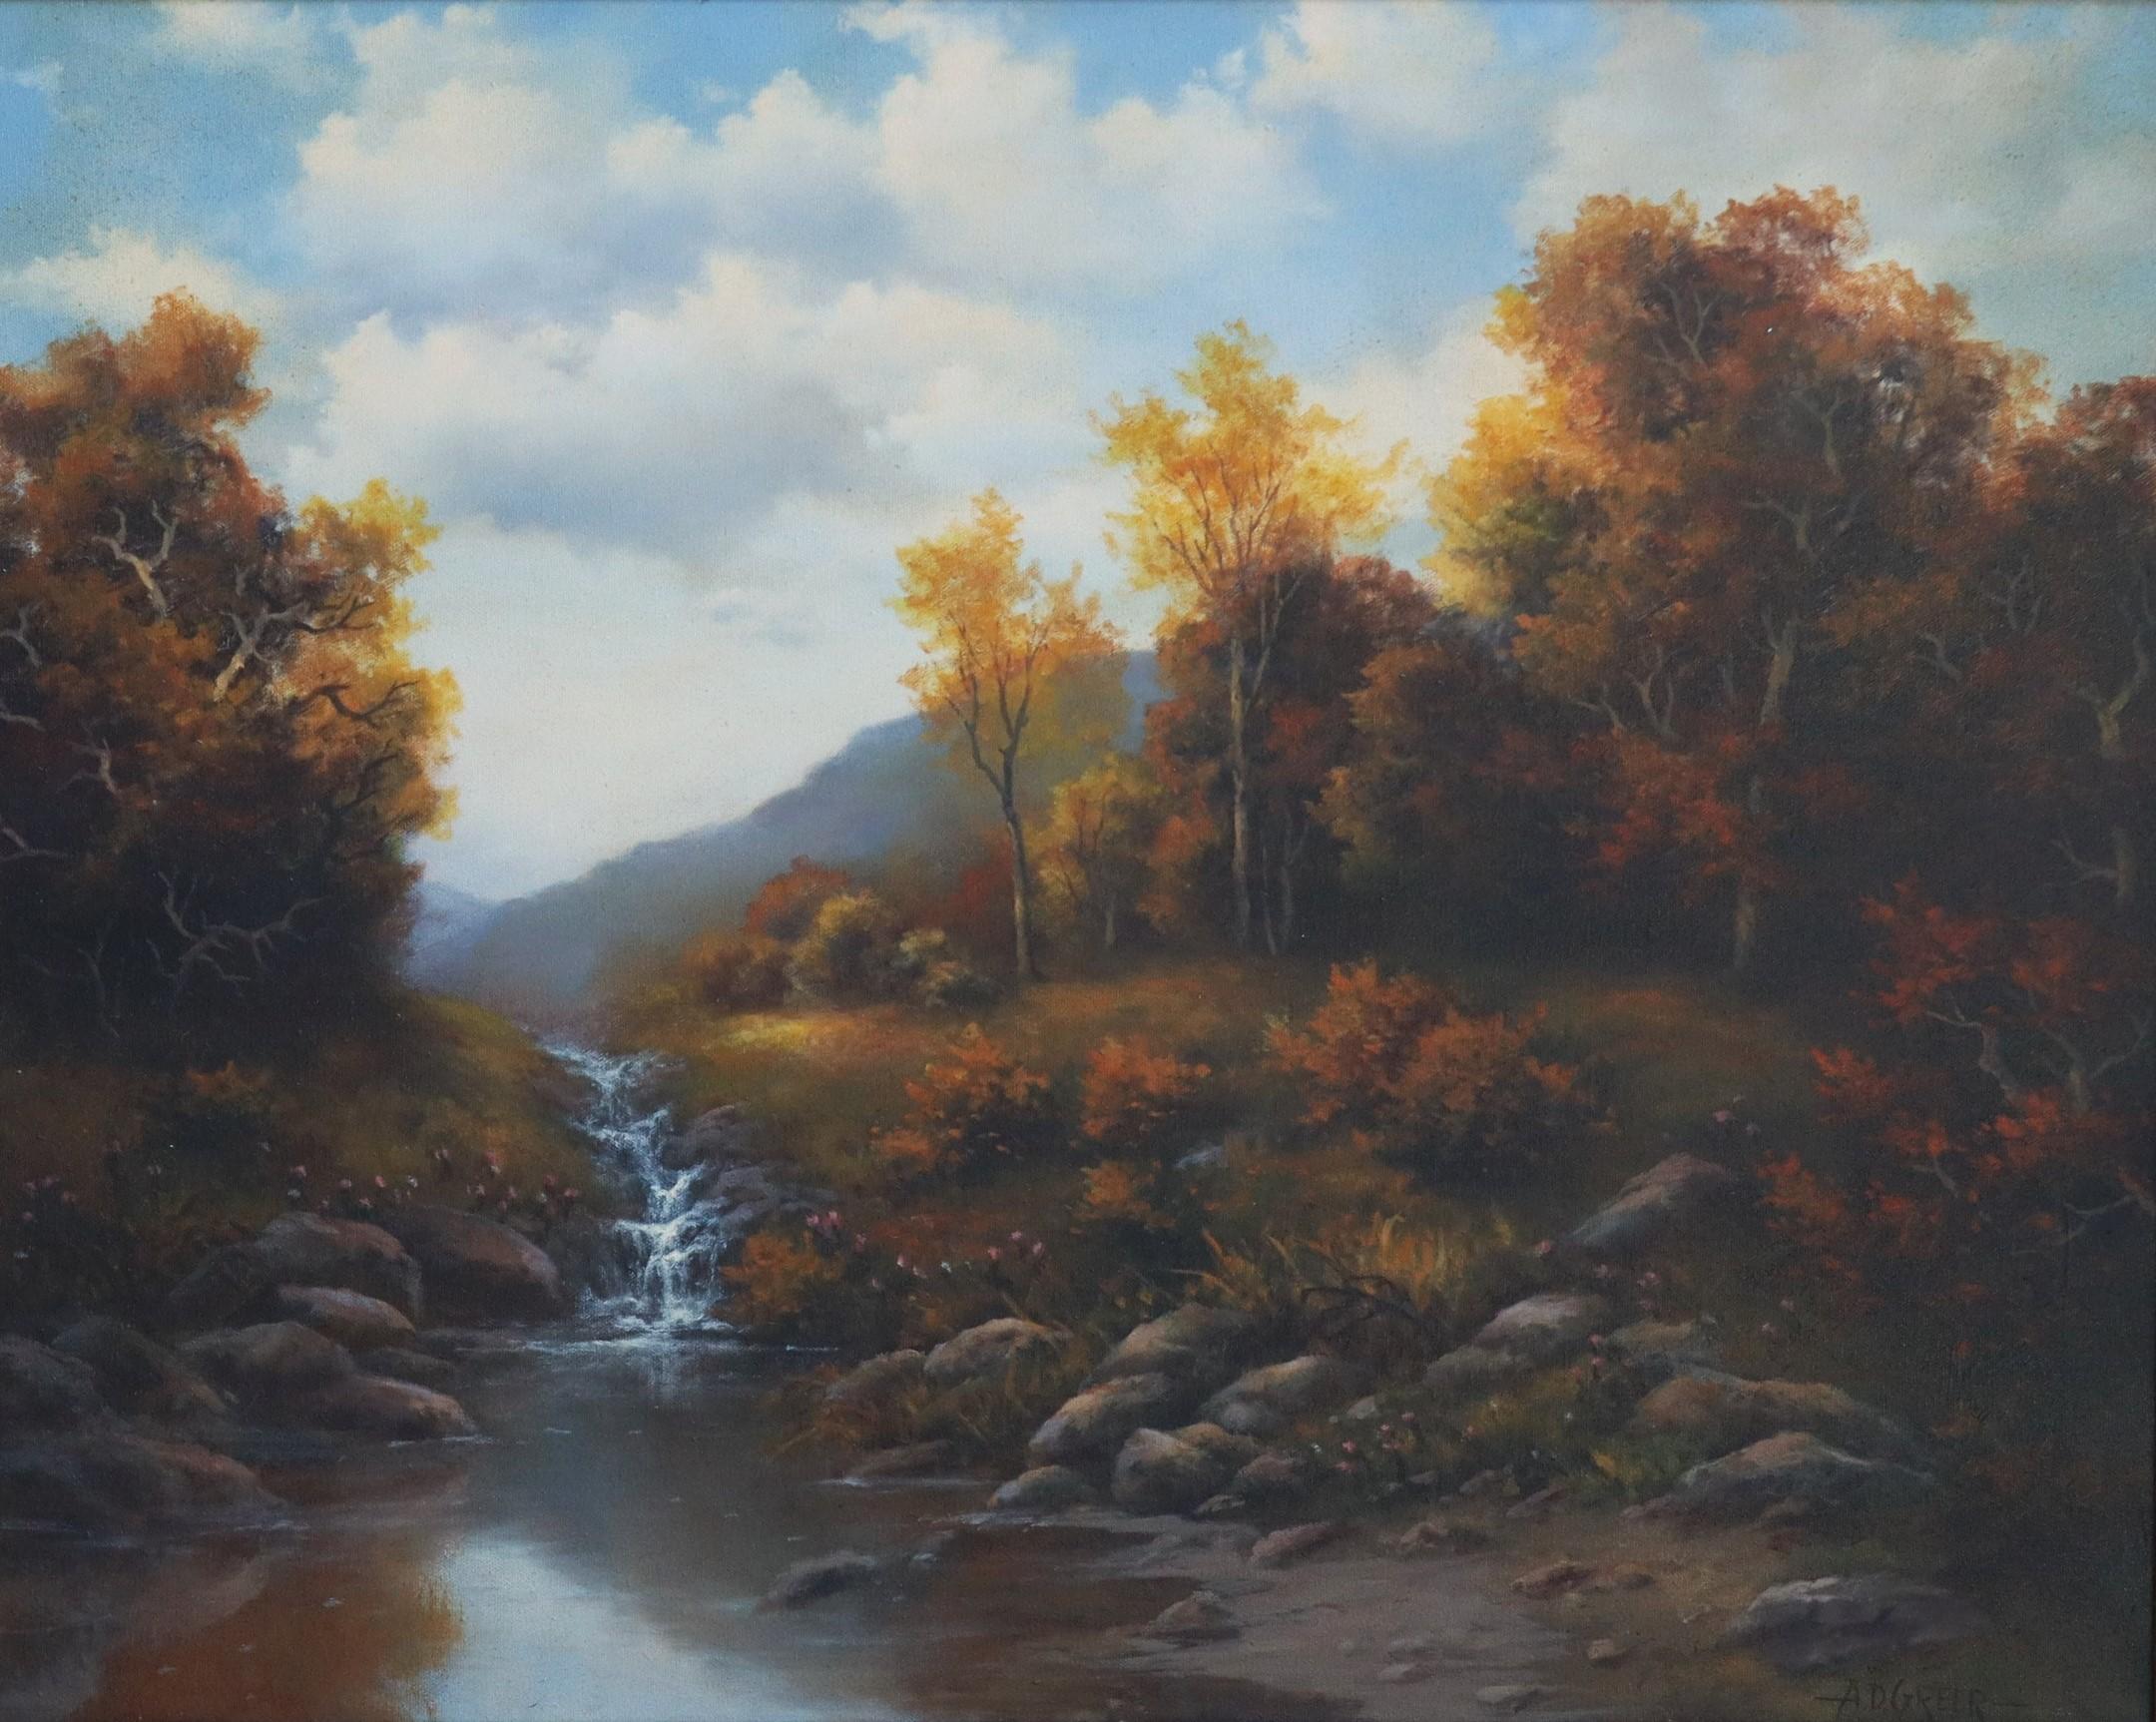 Autumnal Mountain Landscape with Creek